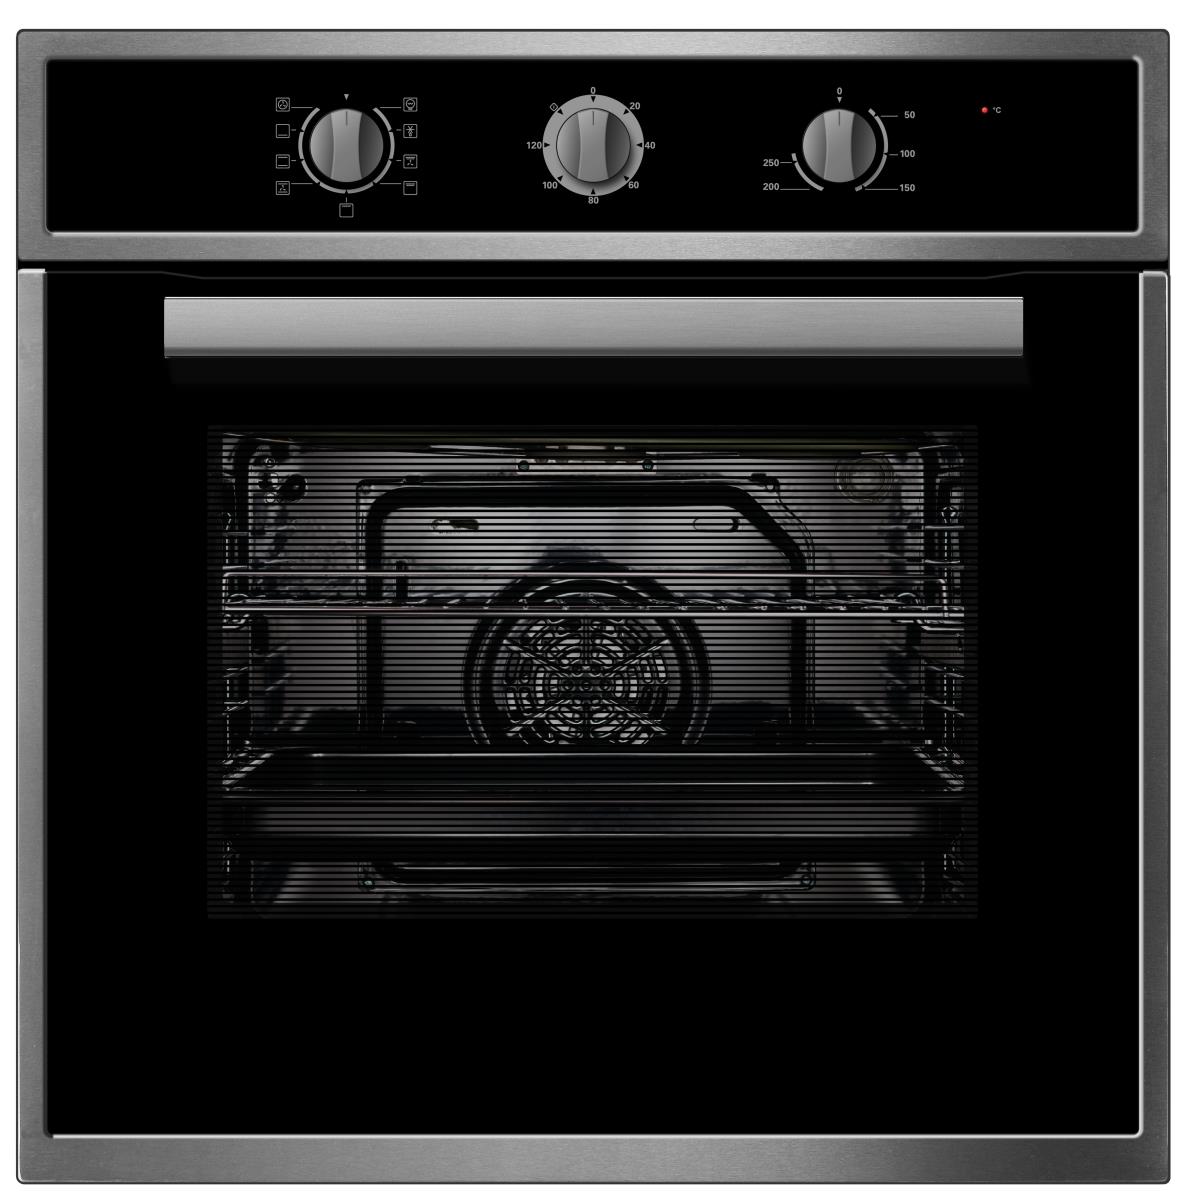 MIDEA 9 FUNCTION WALL OVEN*NEW*